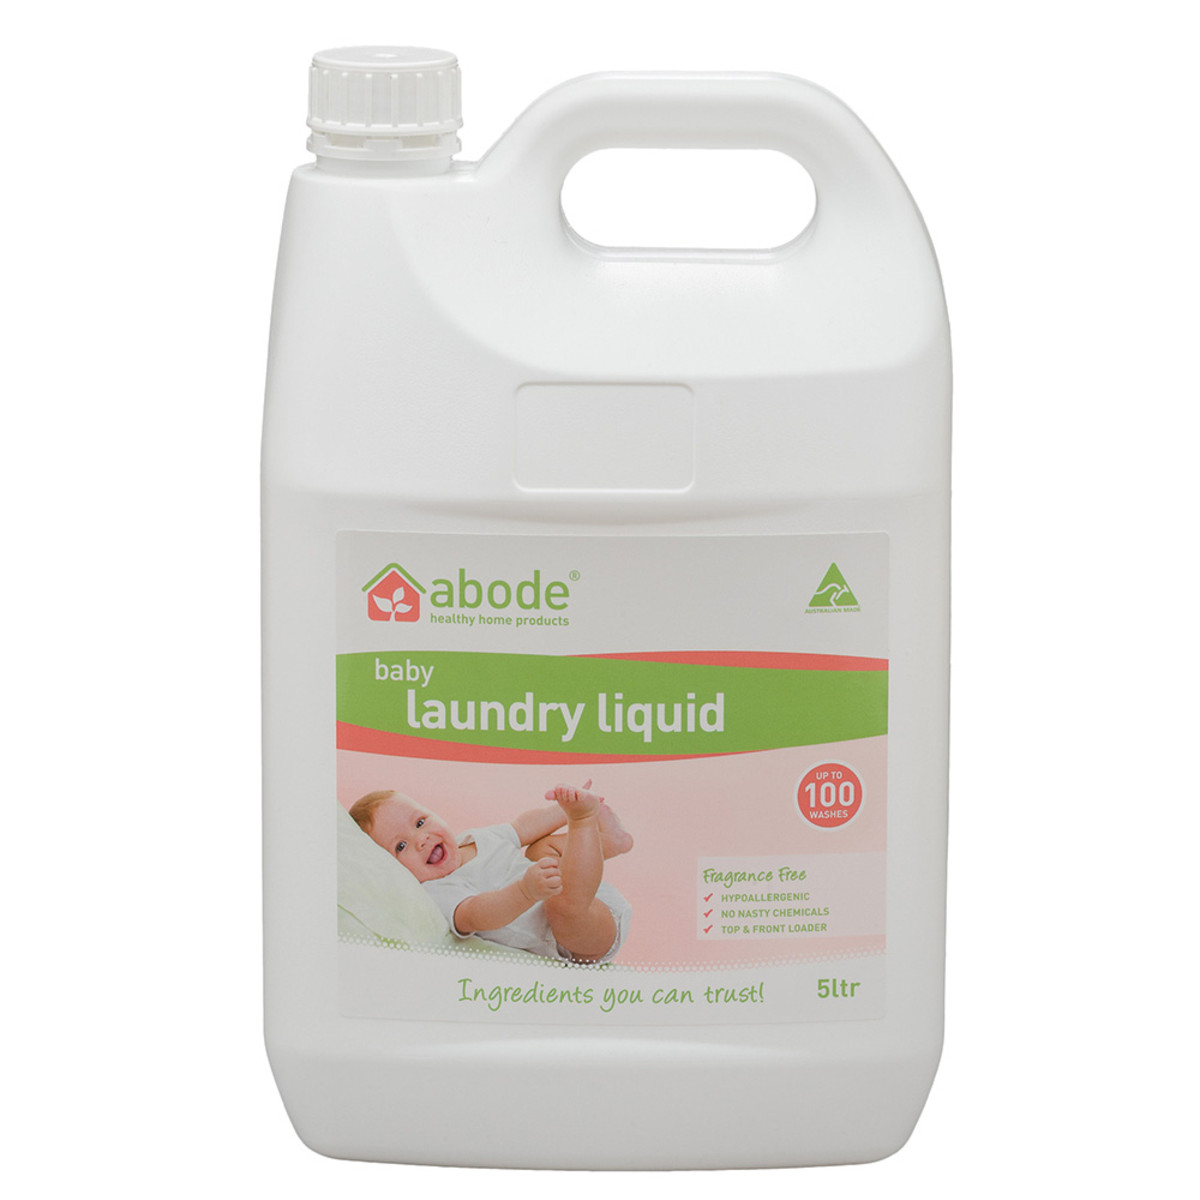 ABODE - Laundry Liquid (Front & Top Loader) Baby Fragrance Free